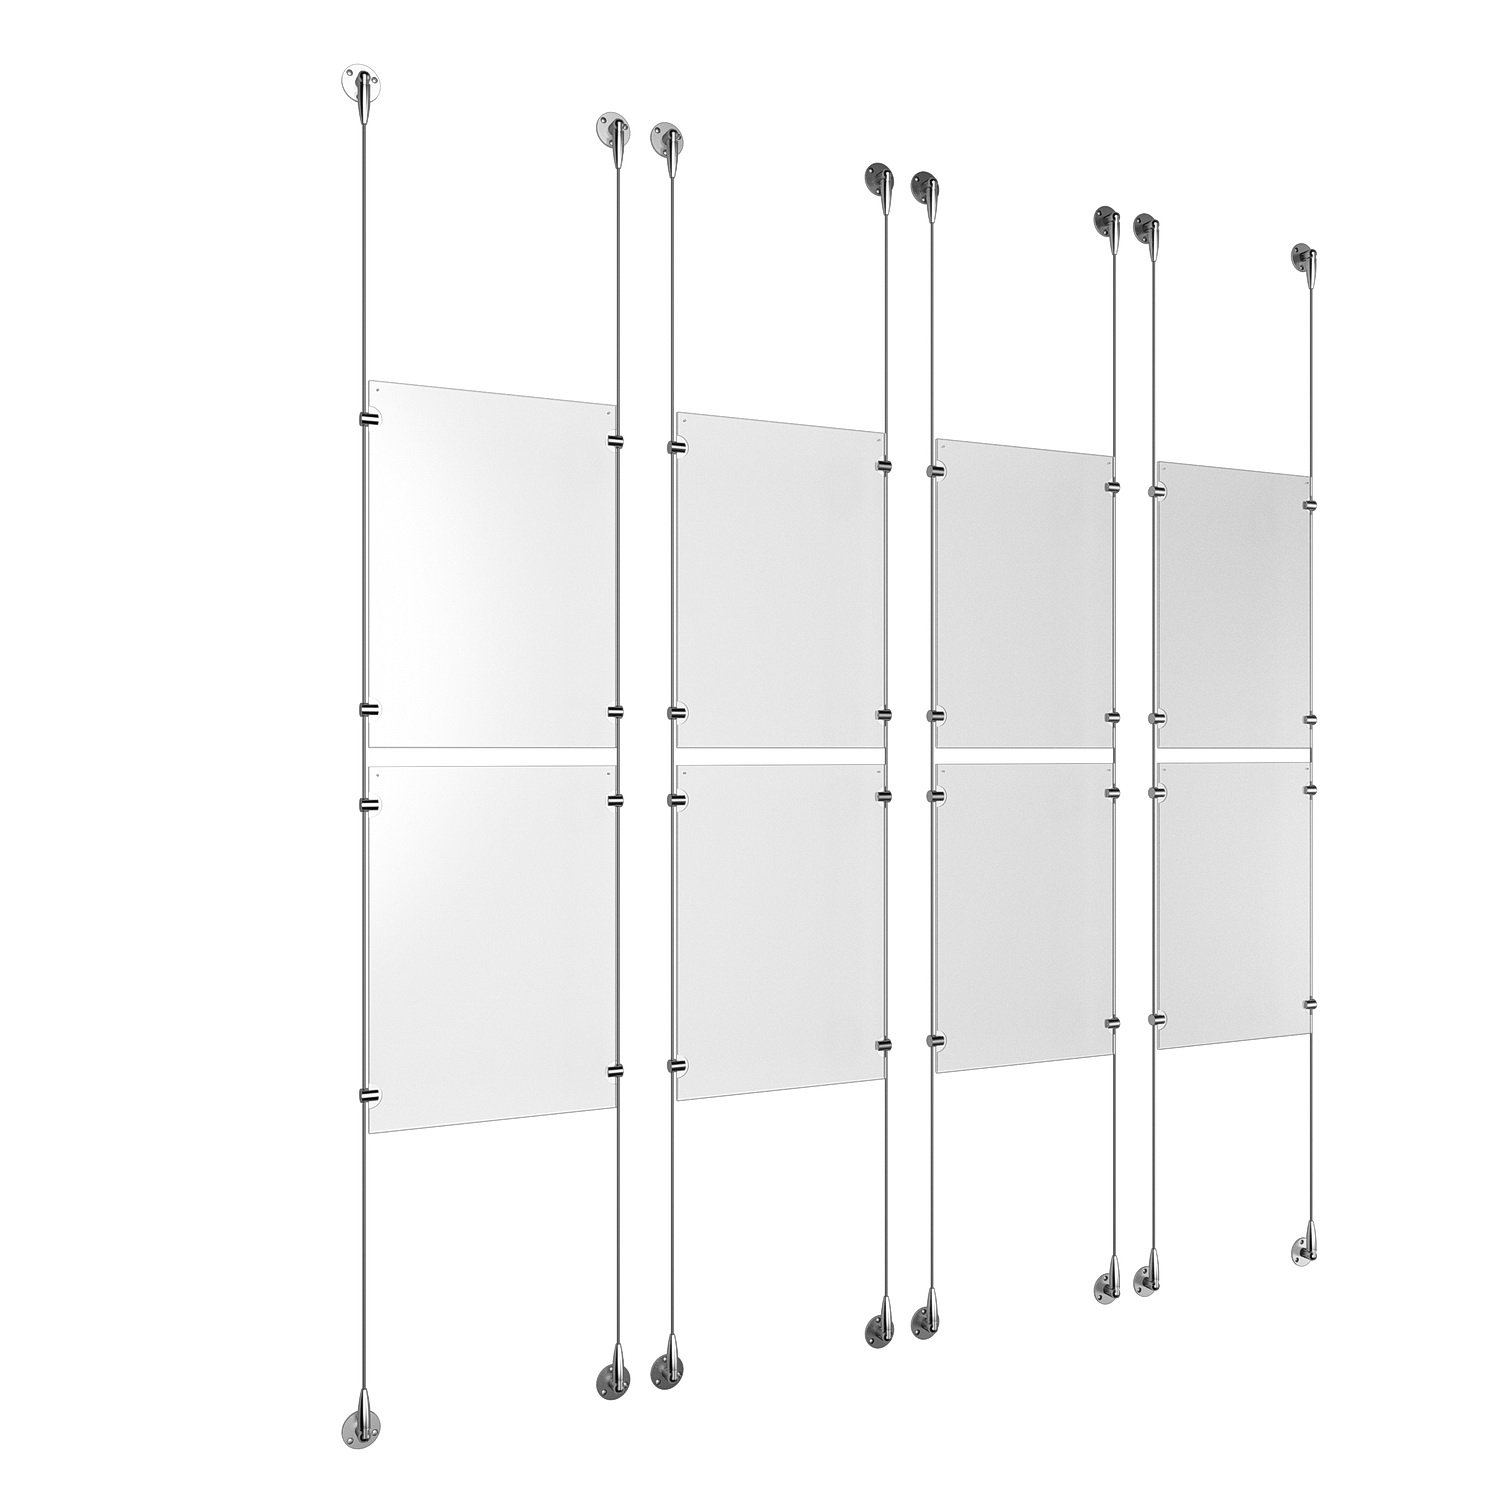 (8) 11'' Width x 17'' Height Clear Acrylic Frame & (8) Aluminum Clear Anodized Adjustable Angle Signature 1/8'' Diameter Cable Systems with (32) Single-Sided Panel Grippers